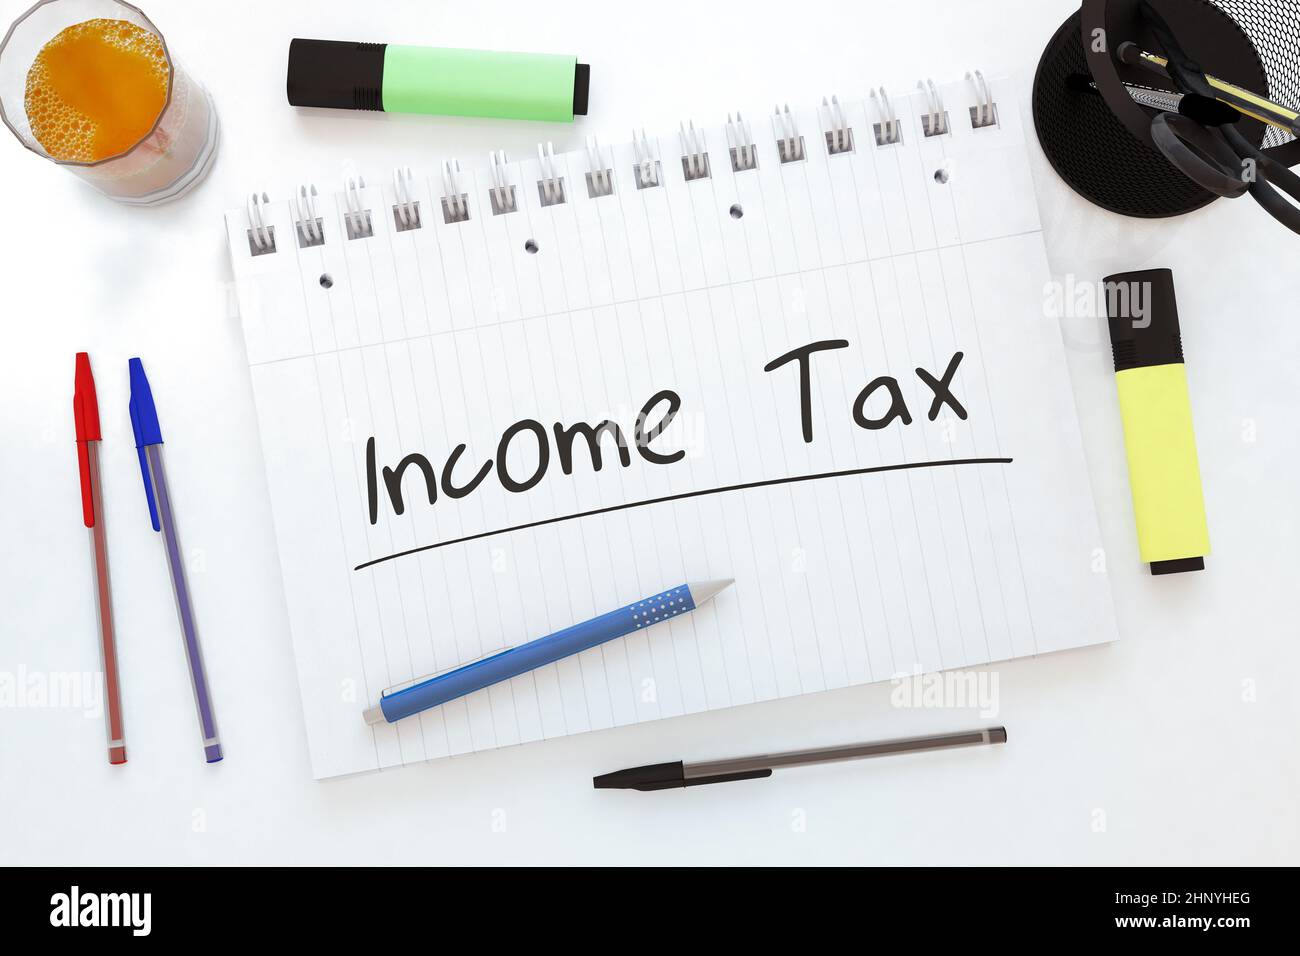 Income Tax - handwritten text in a notebook on a desk - 3d render illustration. Stock Photo